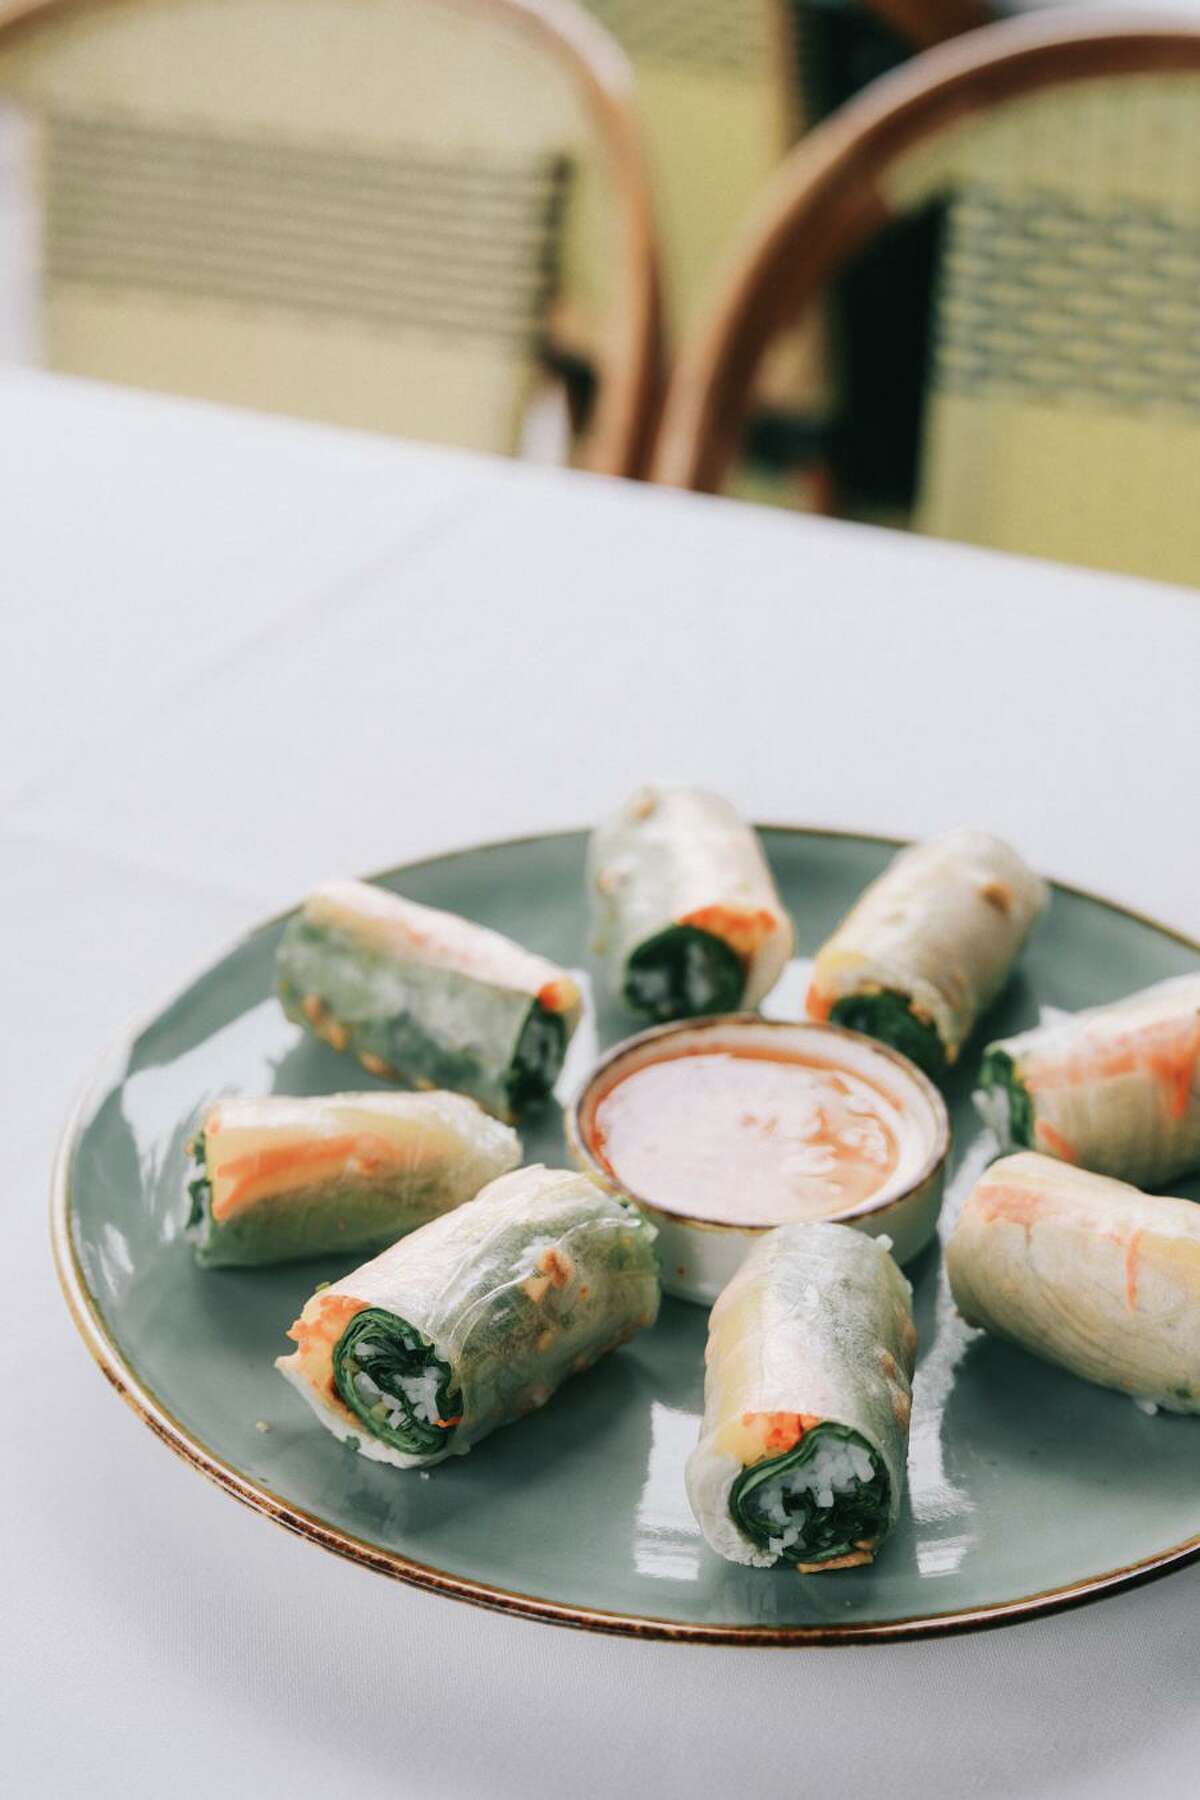 Leftover Thanksgiving turkey is used to make Vietnamese spring rolls.